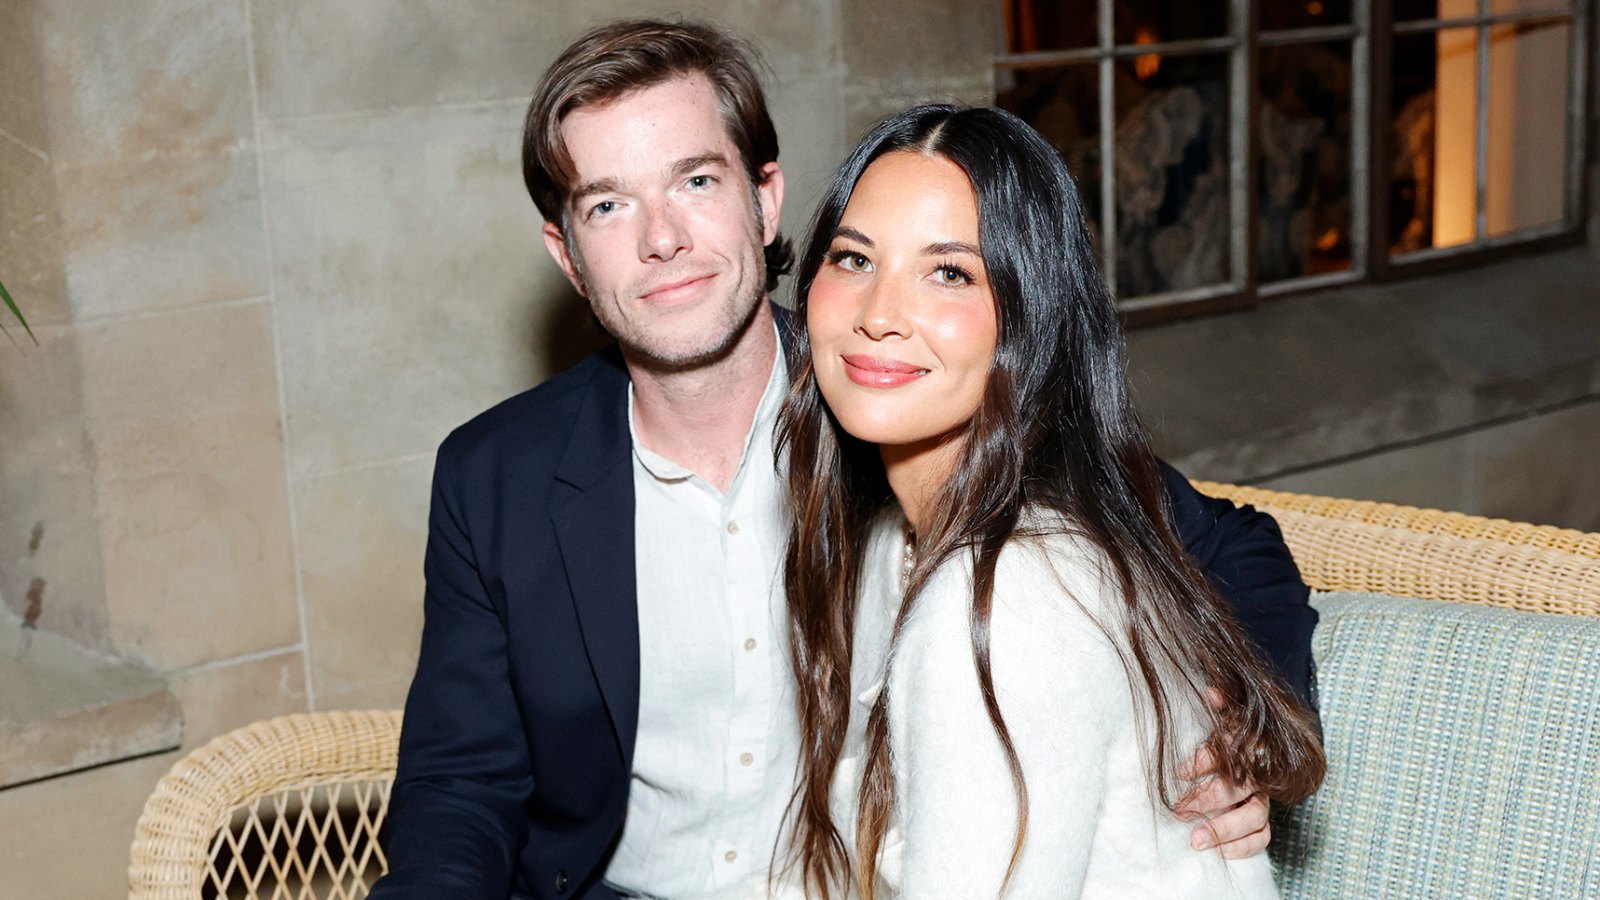 John Mulaney Praises Olivia Munn After Breast Cancer Diagnosis: 'Thank you for fighting so hard'